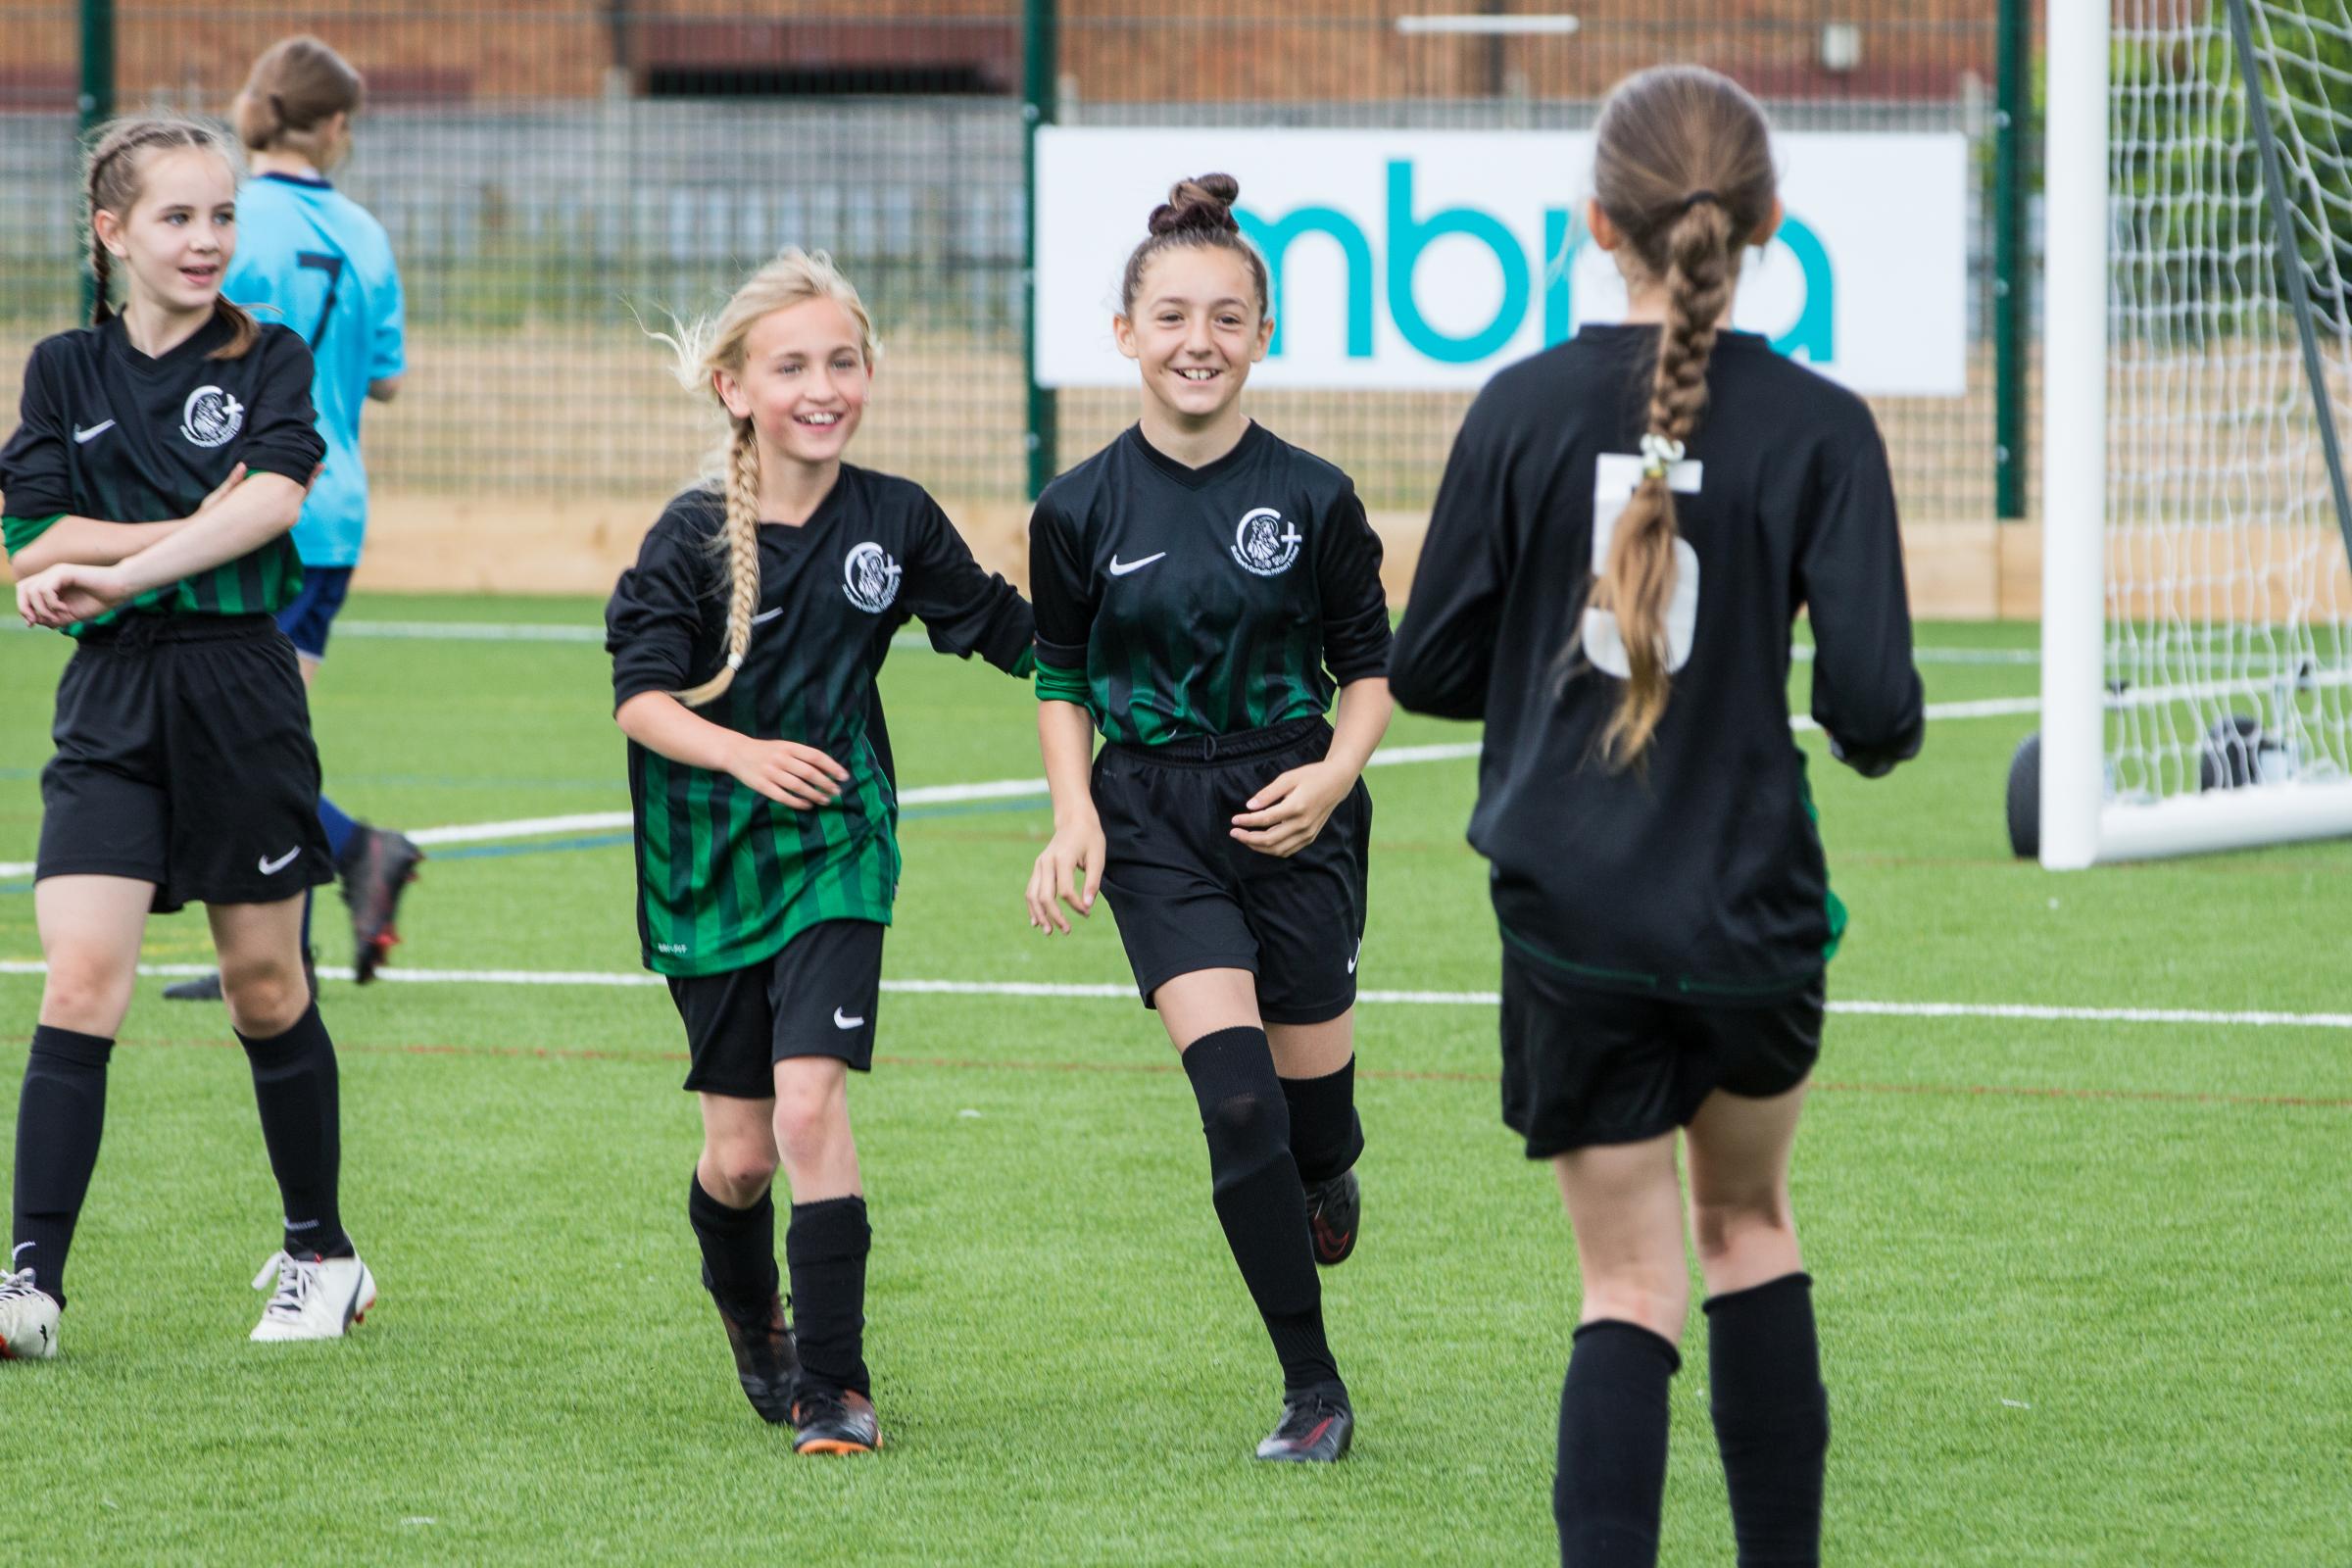 The official opening of the King George V sports hub saw children from eight Chester primary schools taking part in a girls’ football tournament on the new 3G pitch.